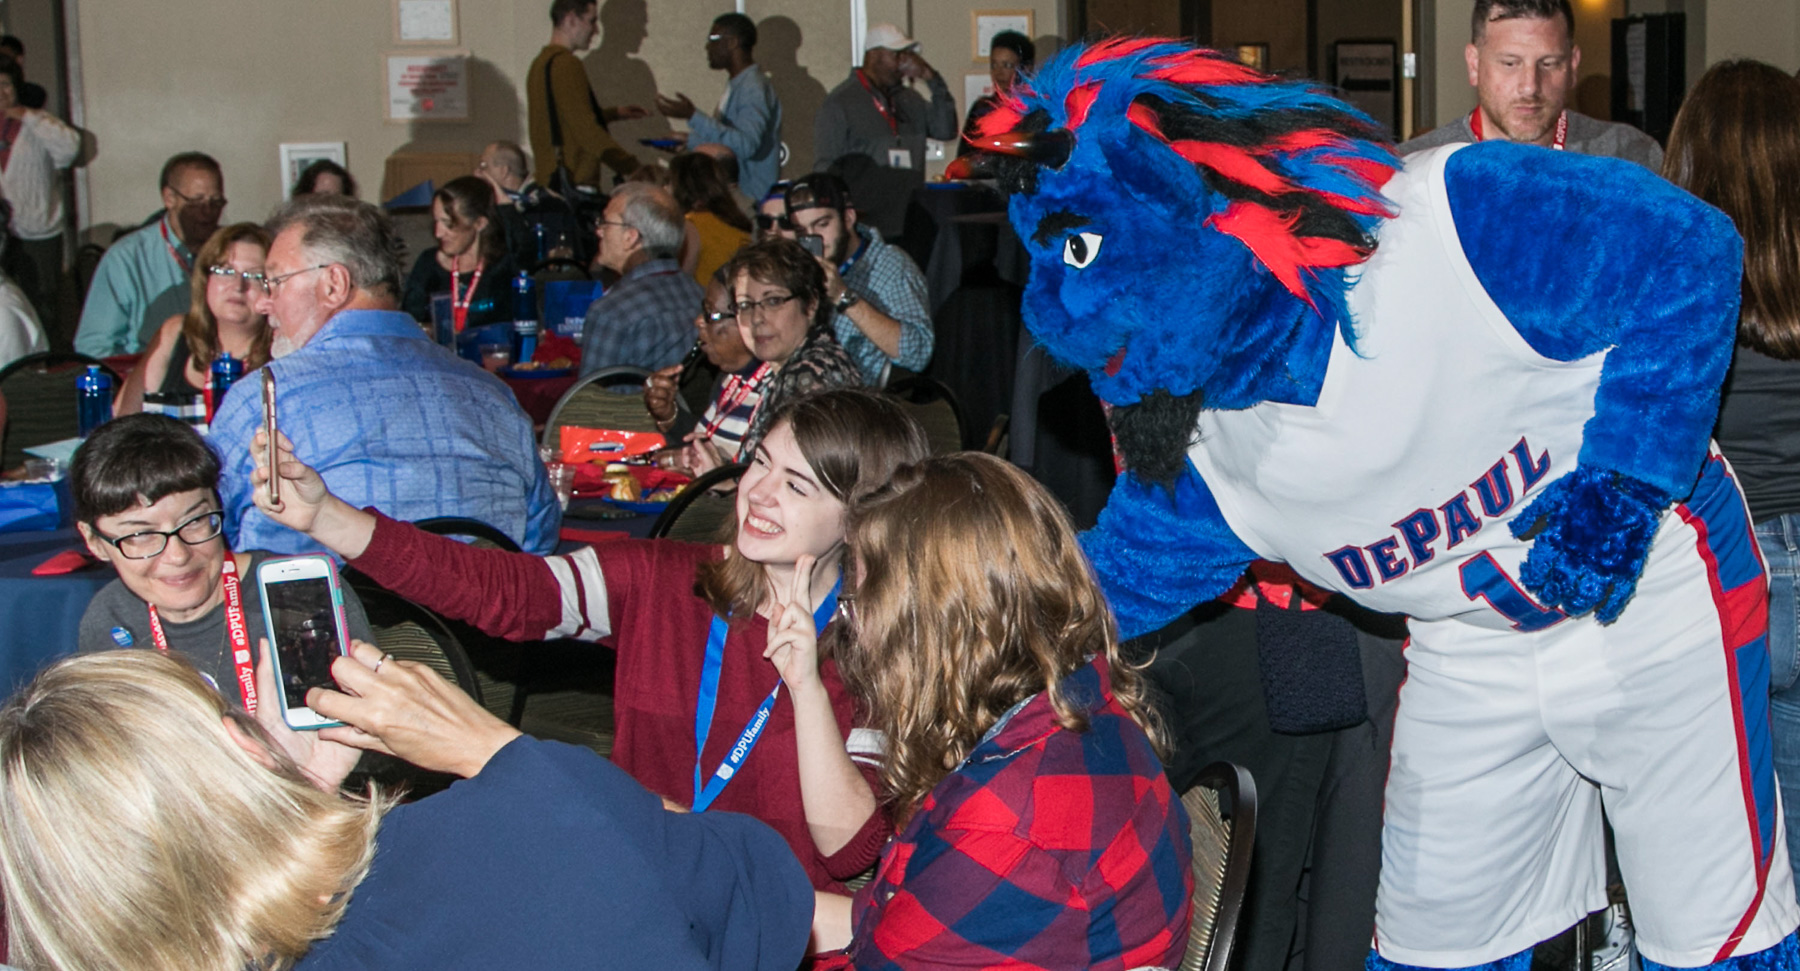 DIBS poses with guests at the Family Weekend Kickoff celebration. Student groups performed for the guests during a buffet dinner that started the weekend of festivities. (DePaul University/Jamie Moncrief)